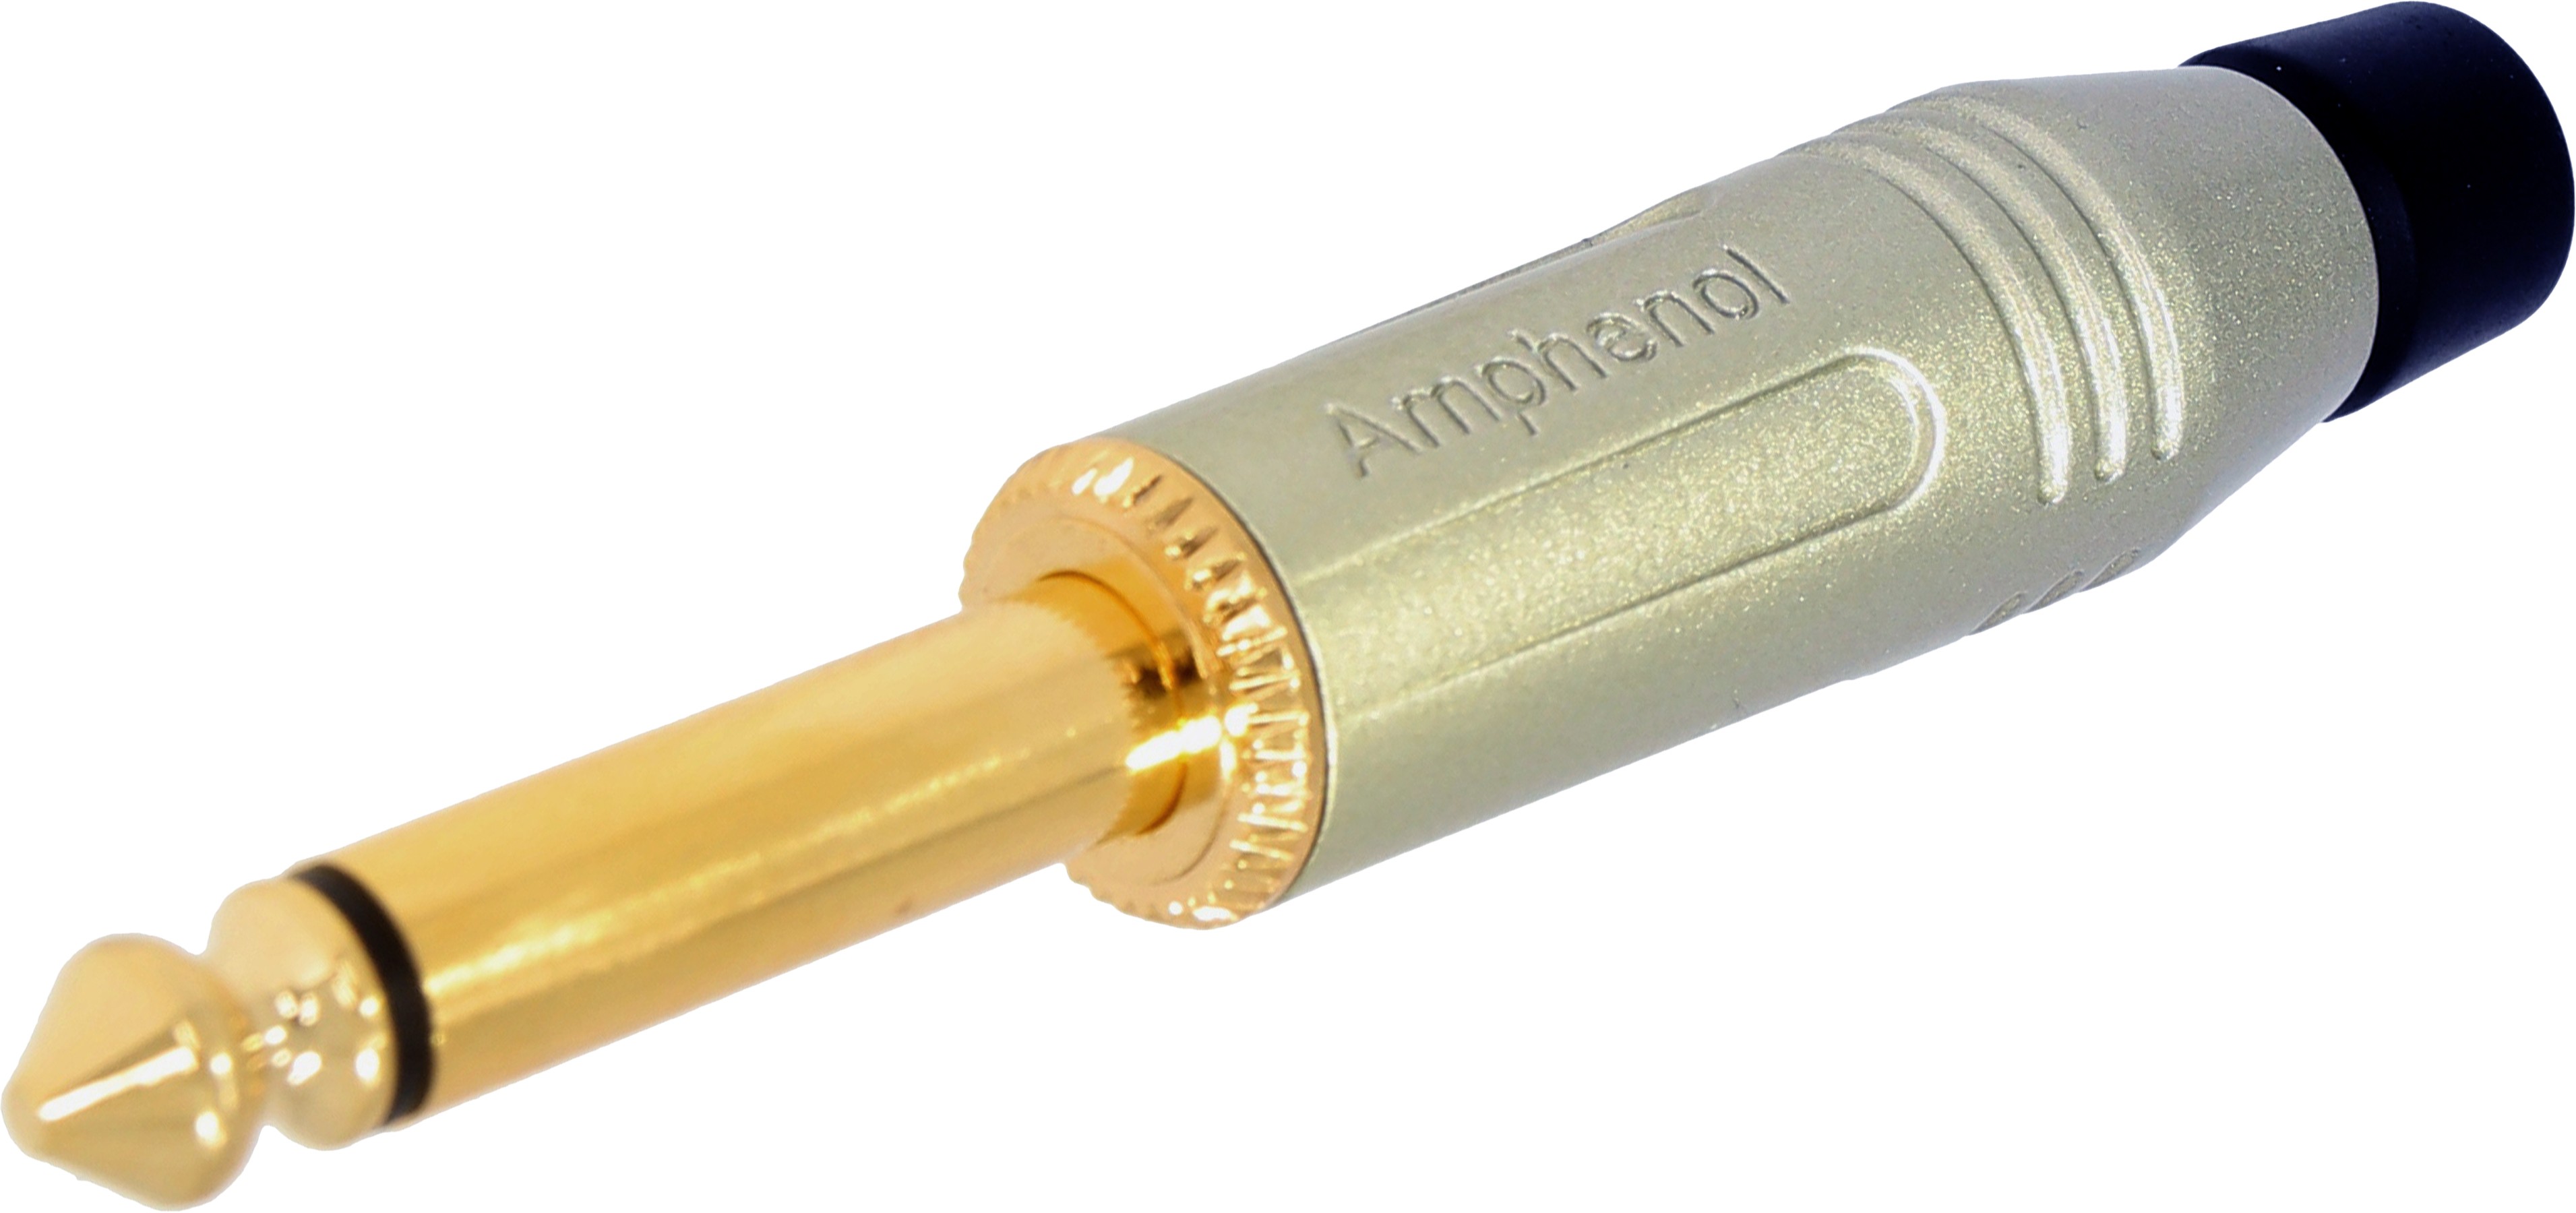 AMPHENOL ACPM-GN-AU Male Mono Jack 6.35mm Connector Gold Plated Ø7mm